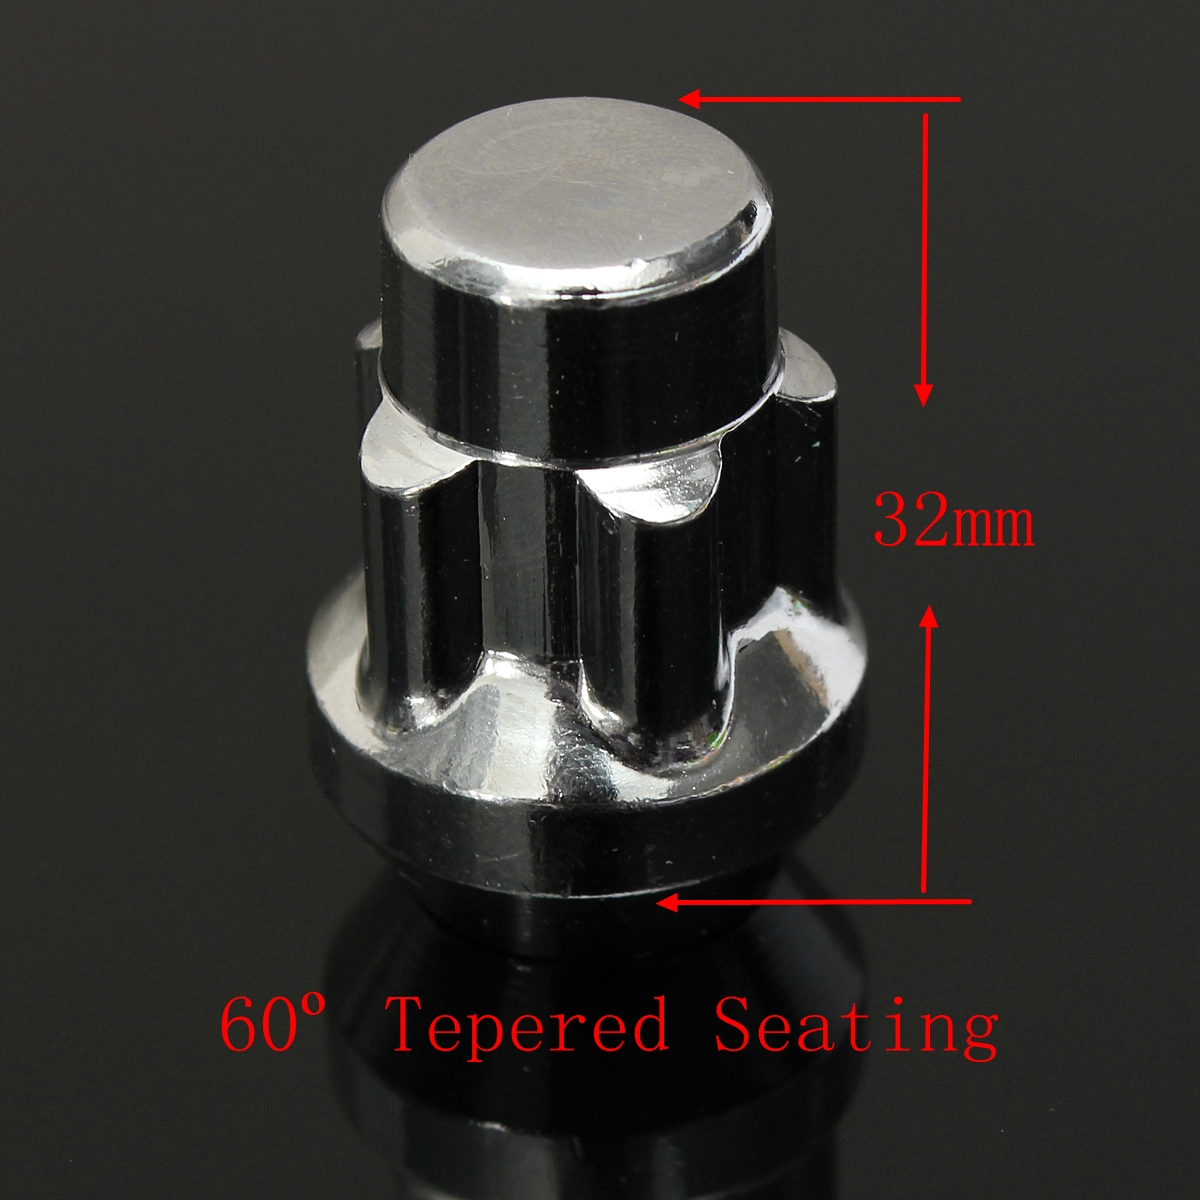 1-Set-Lock-Alloy-Wheel-Anti-Theft-Nuts-Bolts-With-Key-60-Degree-Taped-12x15mm-1007887